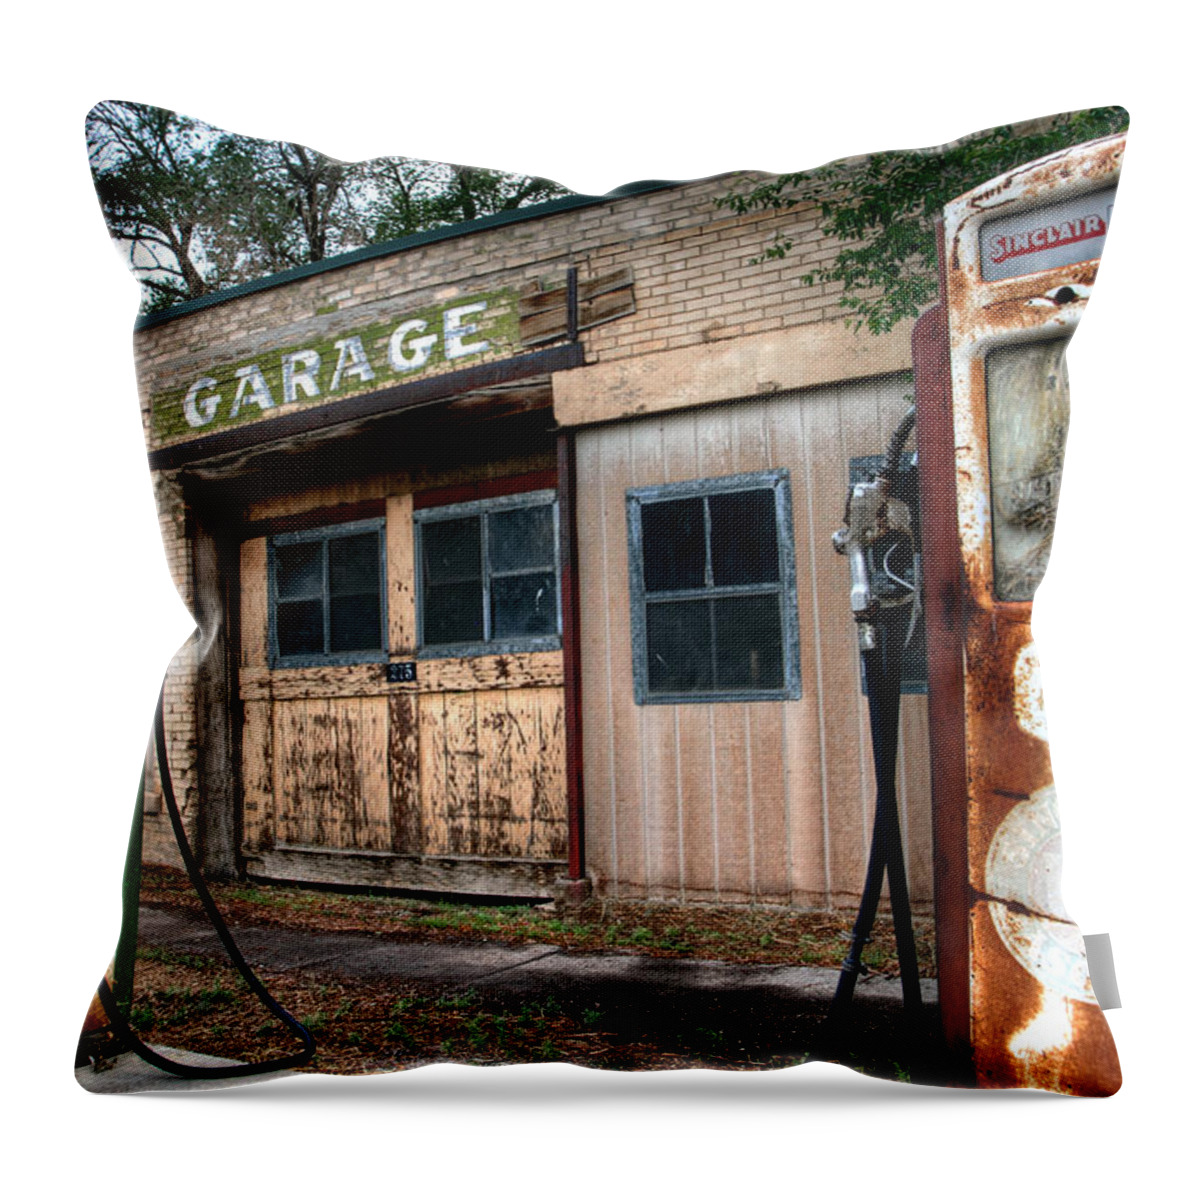 No People Throw Pillow featuring the photograph Old Service Station by Brett Pelletier